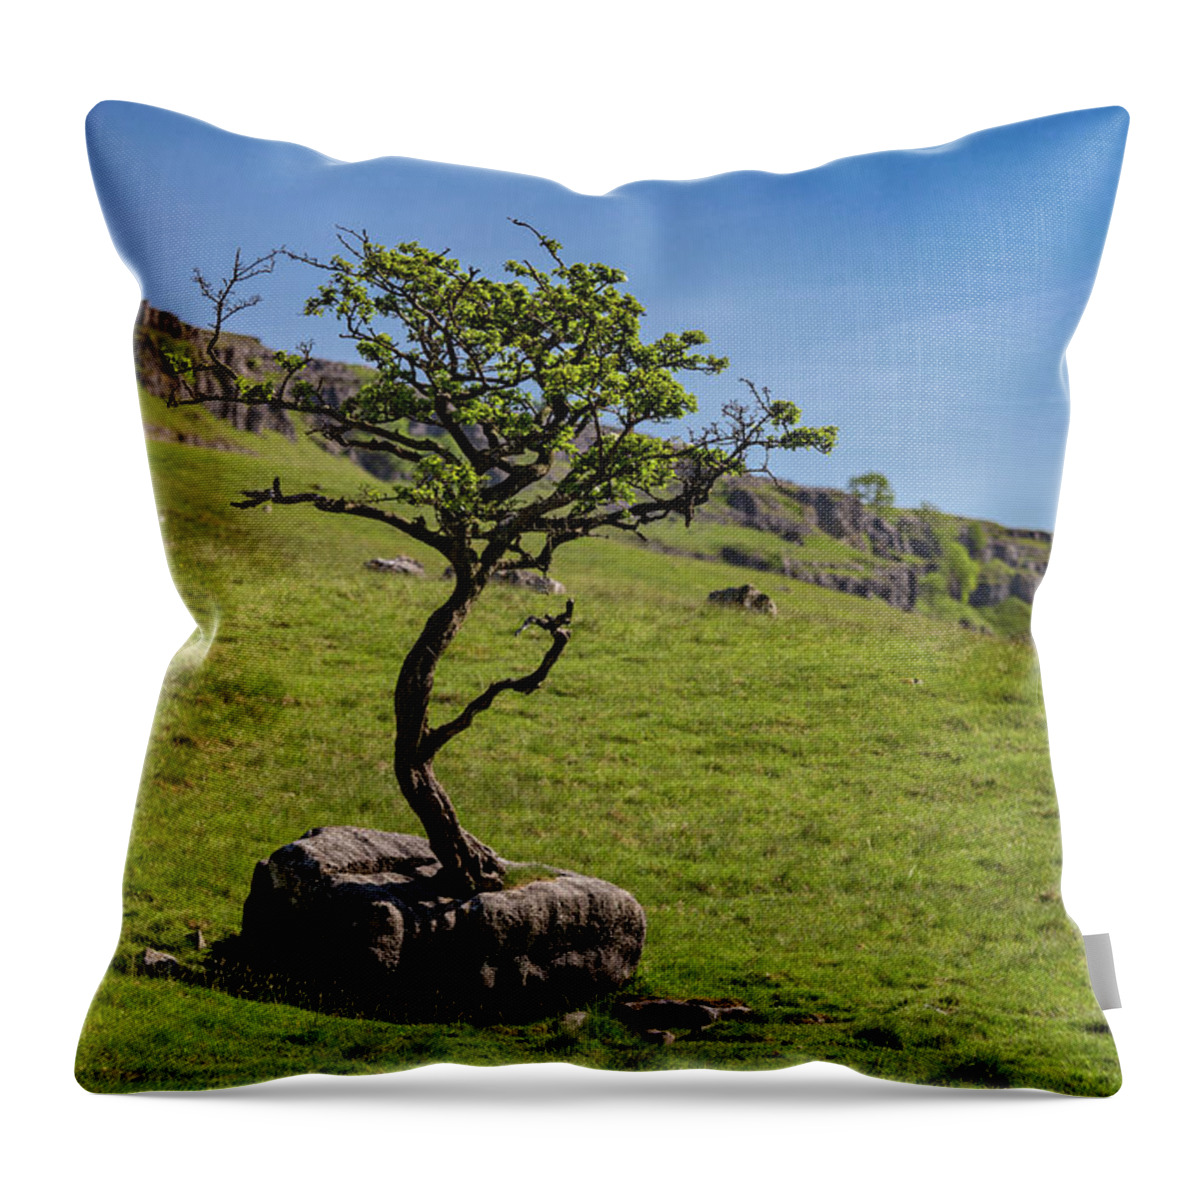 England Throw Pillow featuring the photograph The Tree In The Rock by Tom Holmes Photography